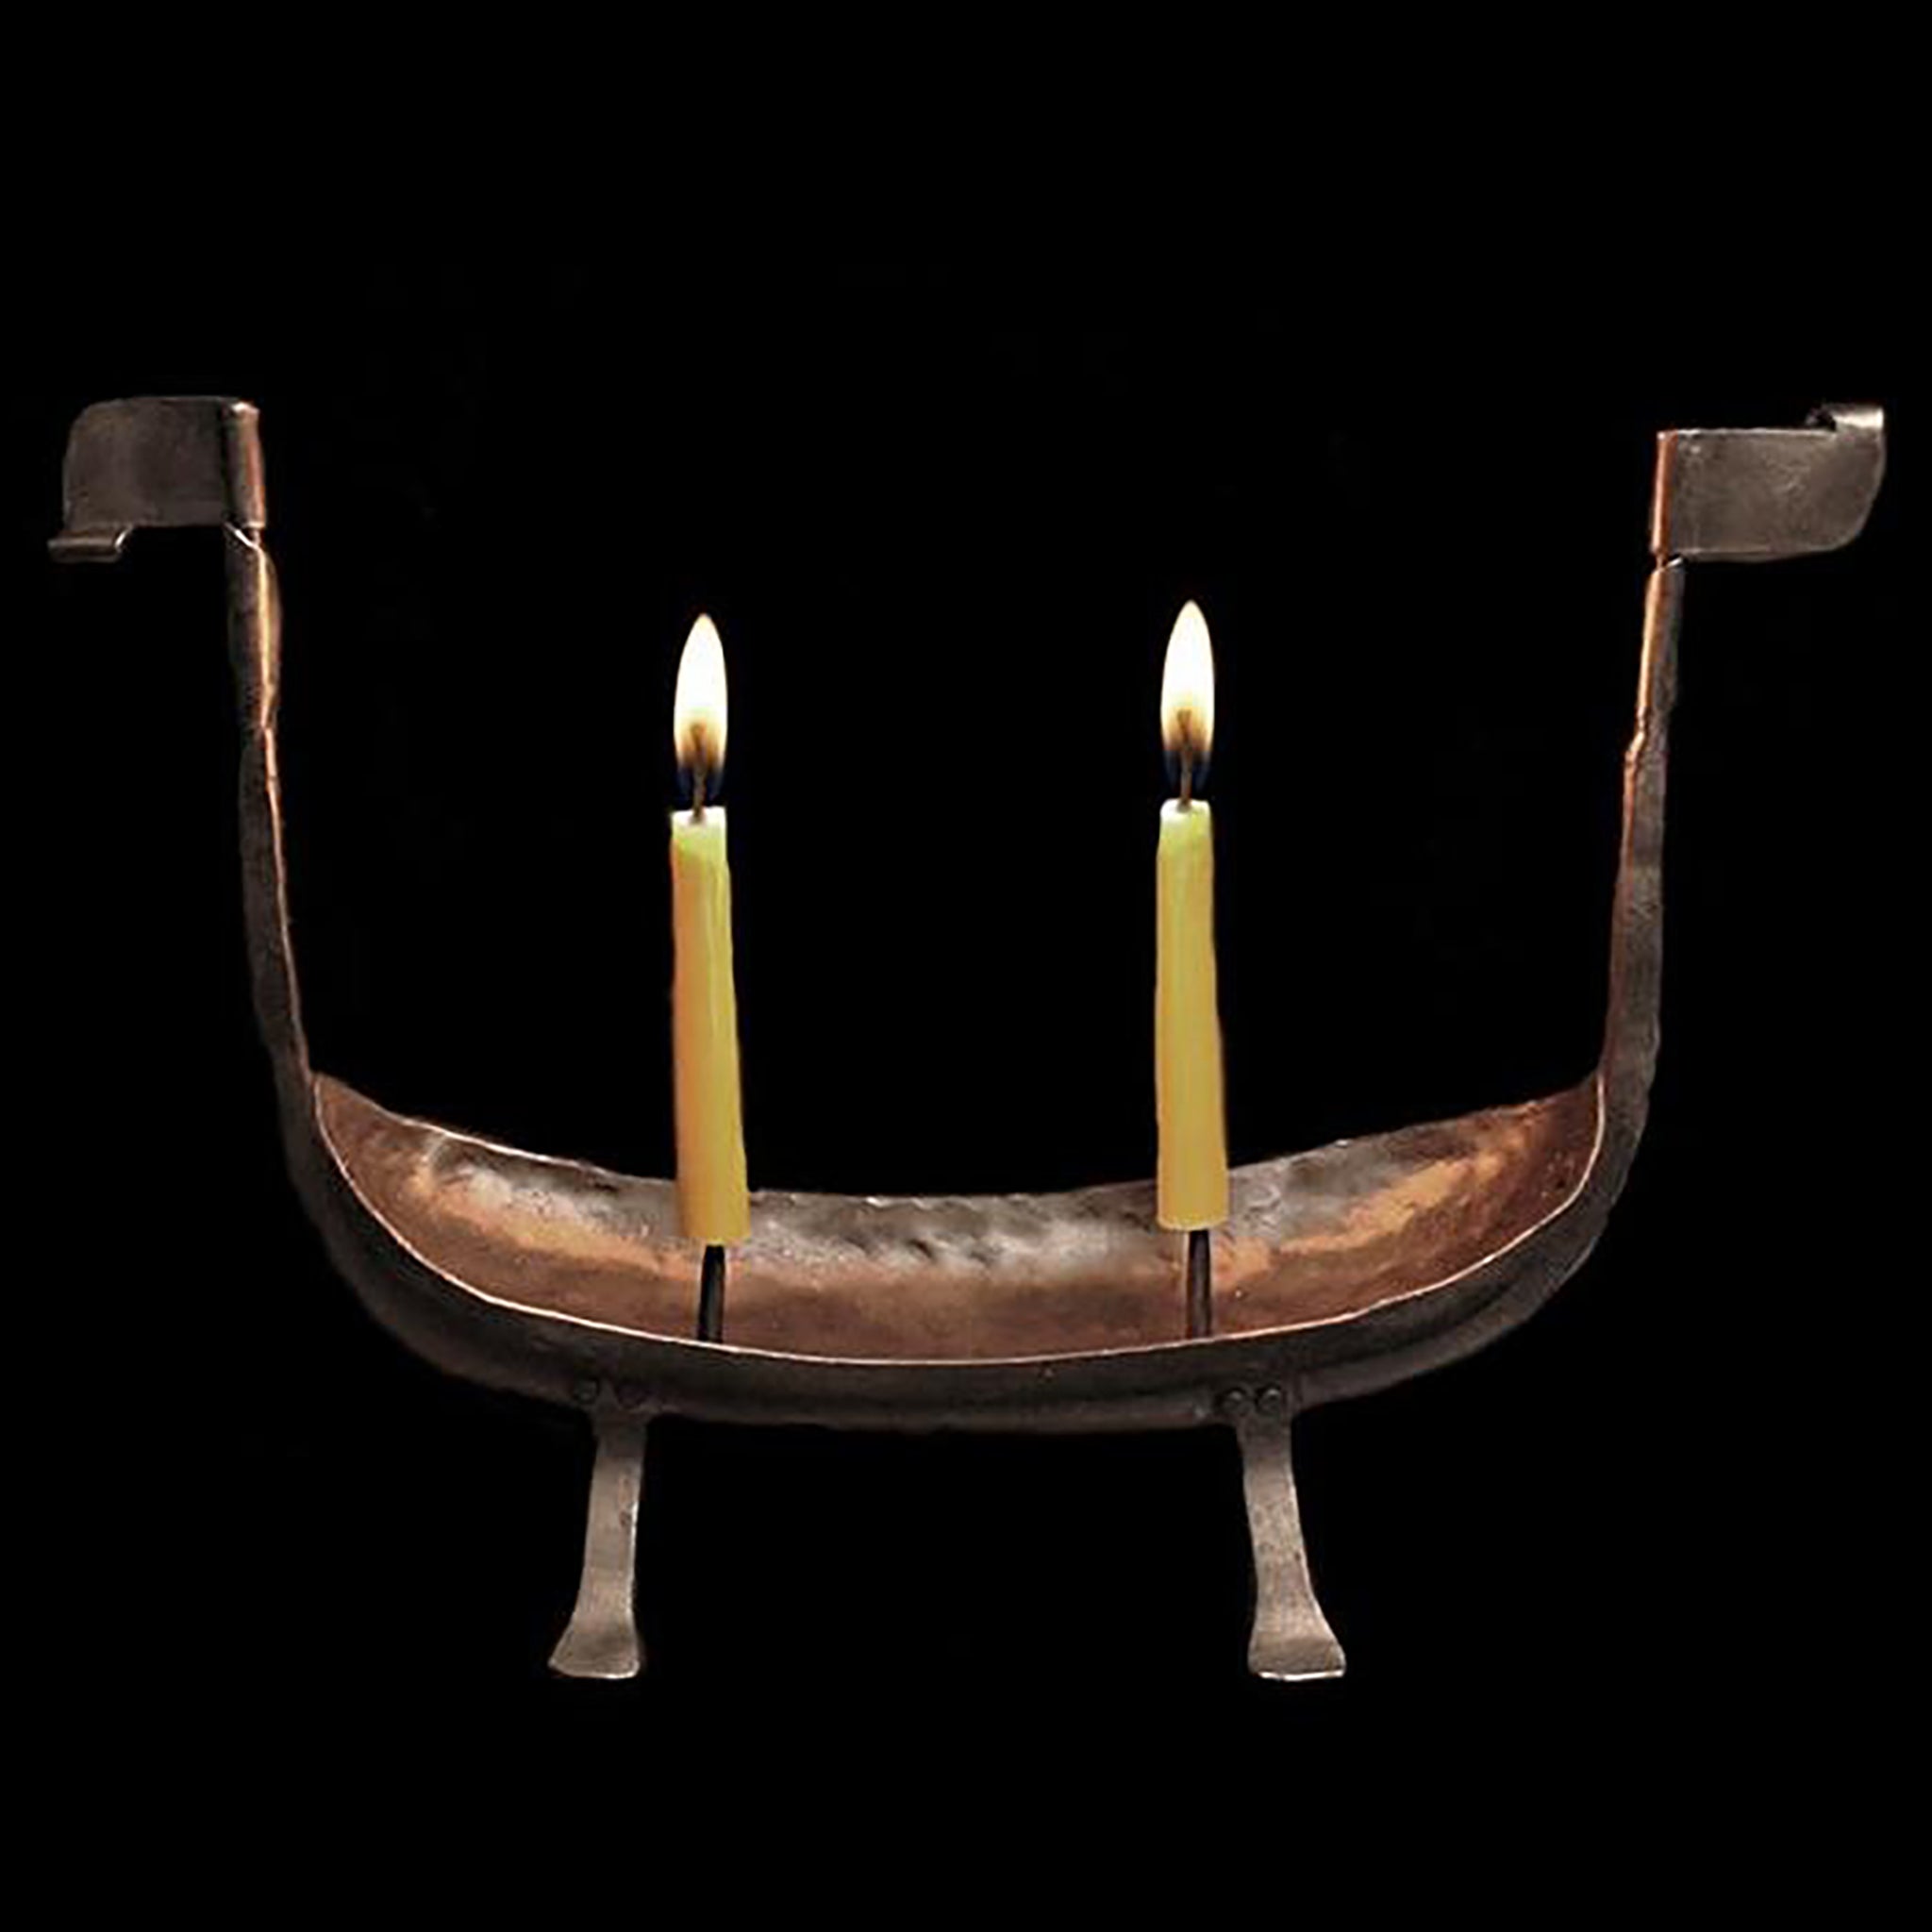 Hand-Forged Iron Candle Holder Replica from 12th Century Norway with 100% Beeswax Candles